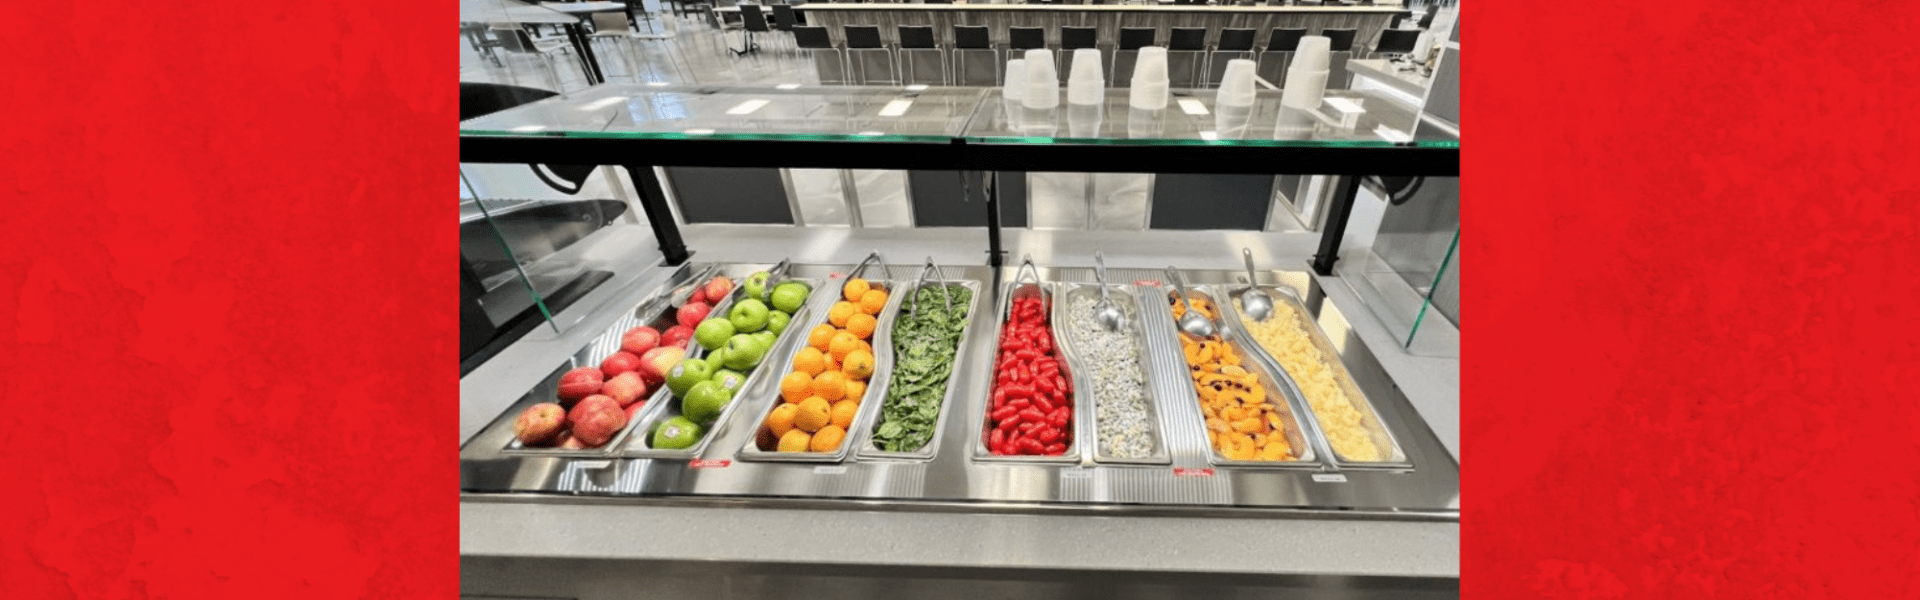 multiteria serving line with food